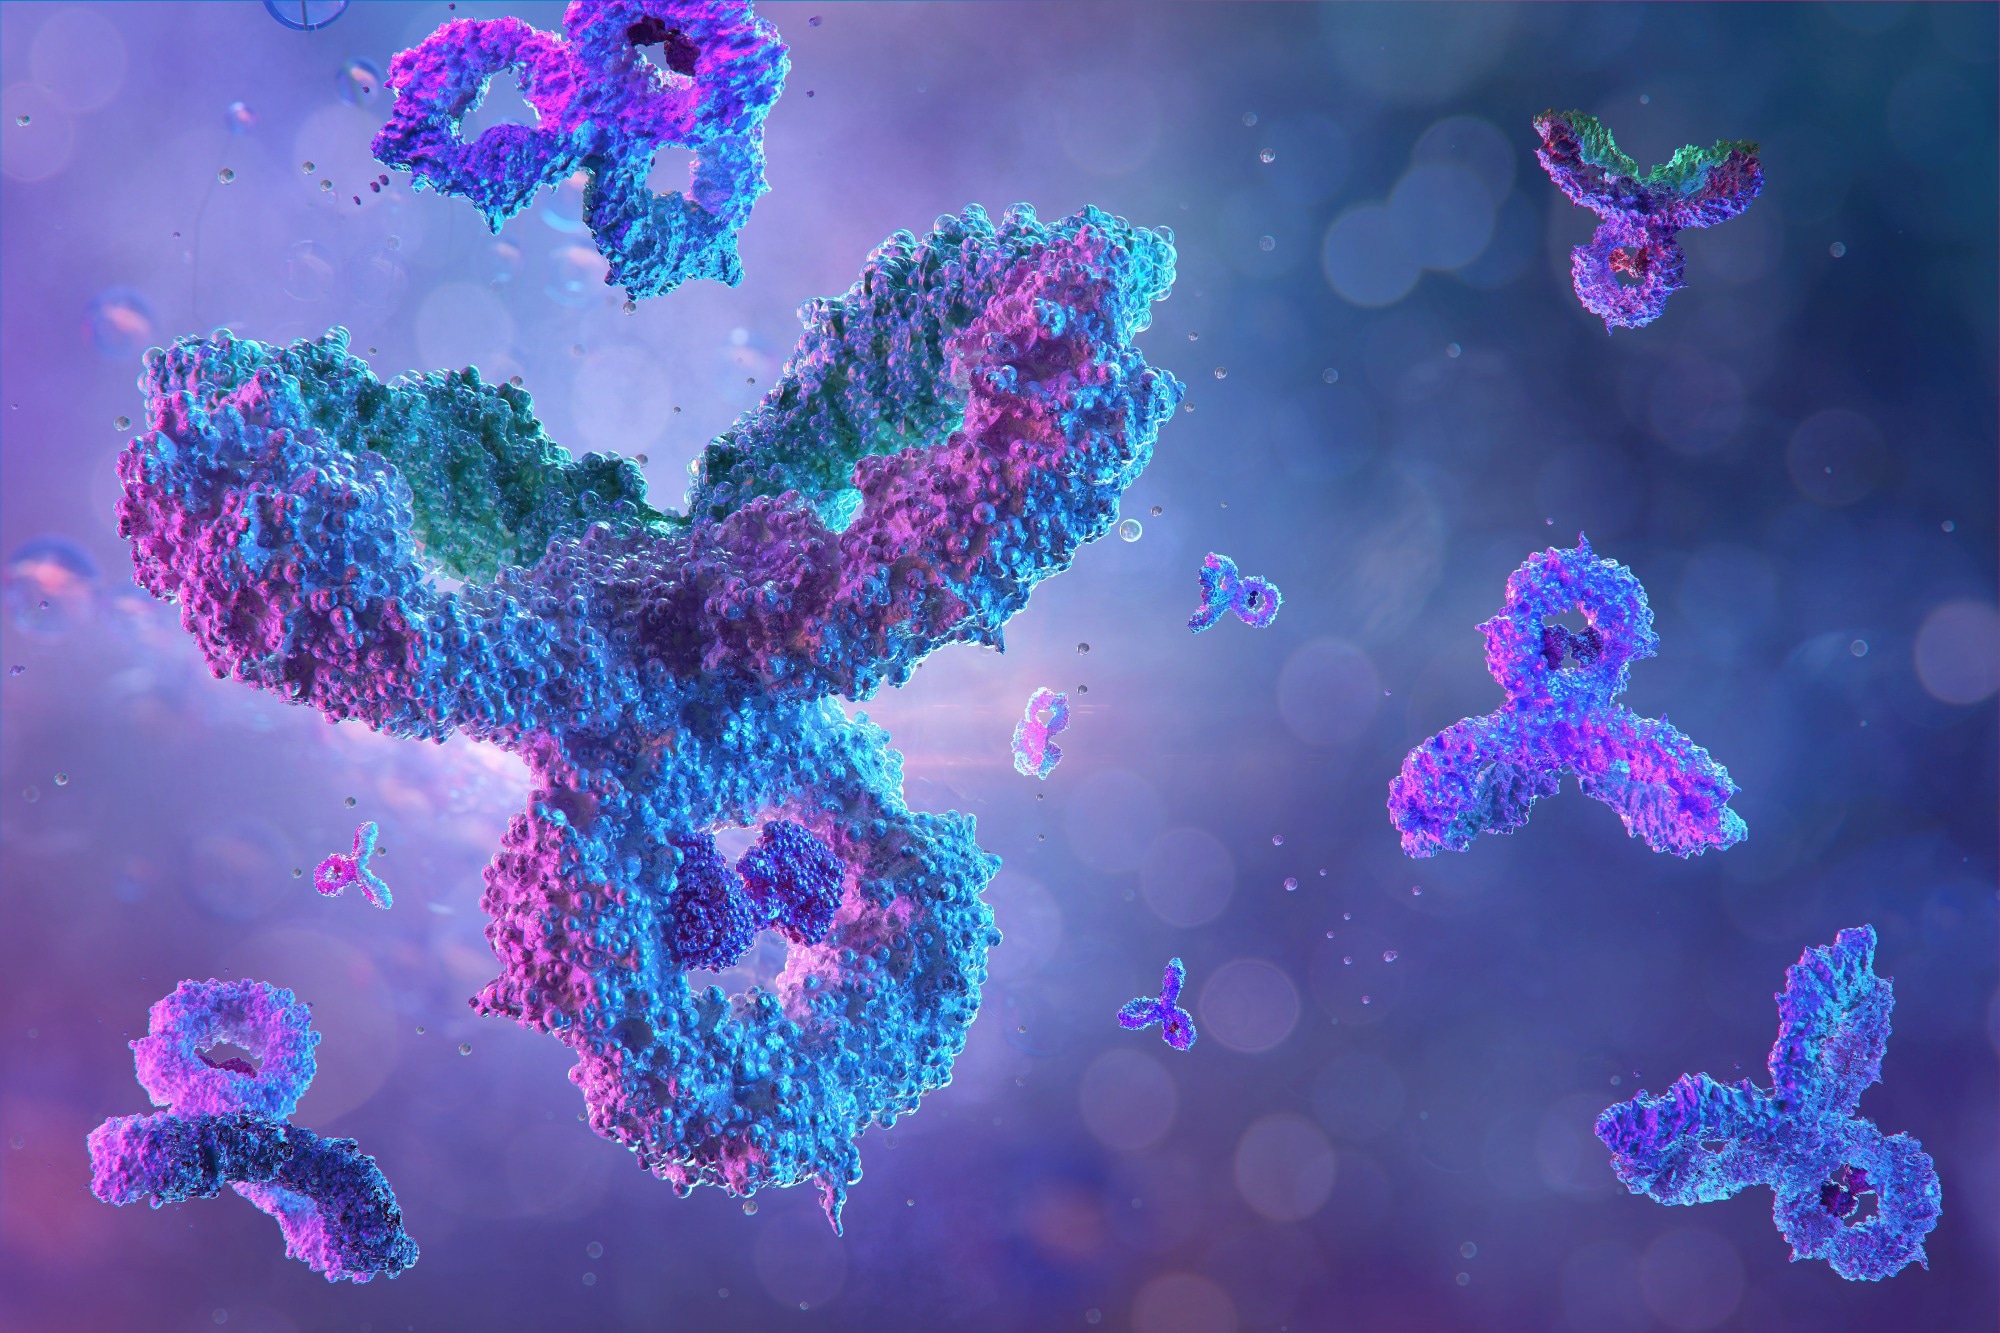 Study: The paradigm of immune escape by SARS-CoV-2 variants and strategies for repositioning subverted mAbs against escaped VOCs. Image Credit: Corona Borealis Studio/Shutterstock